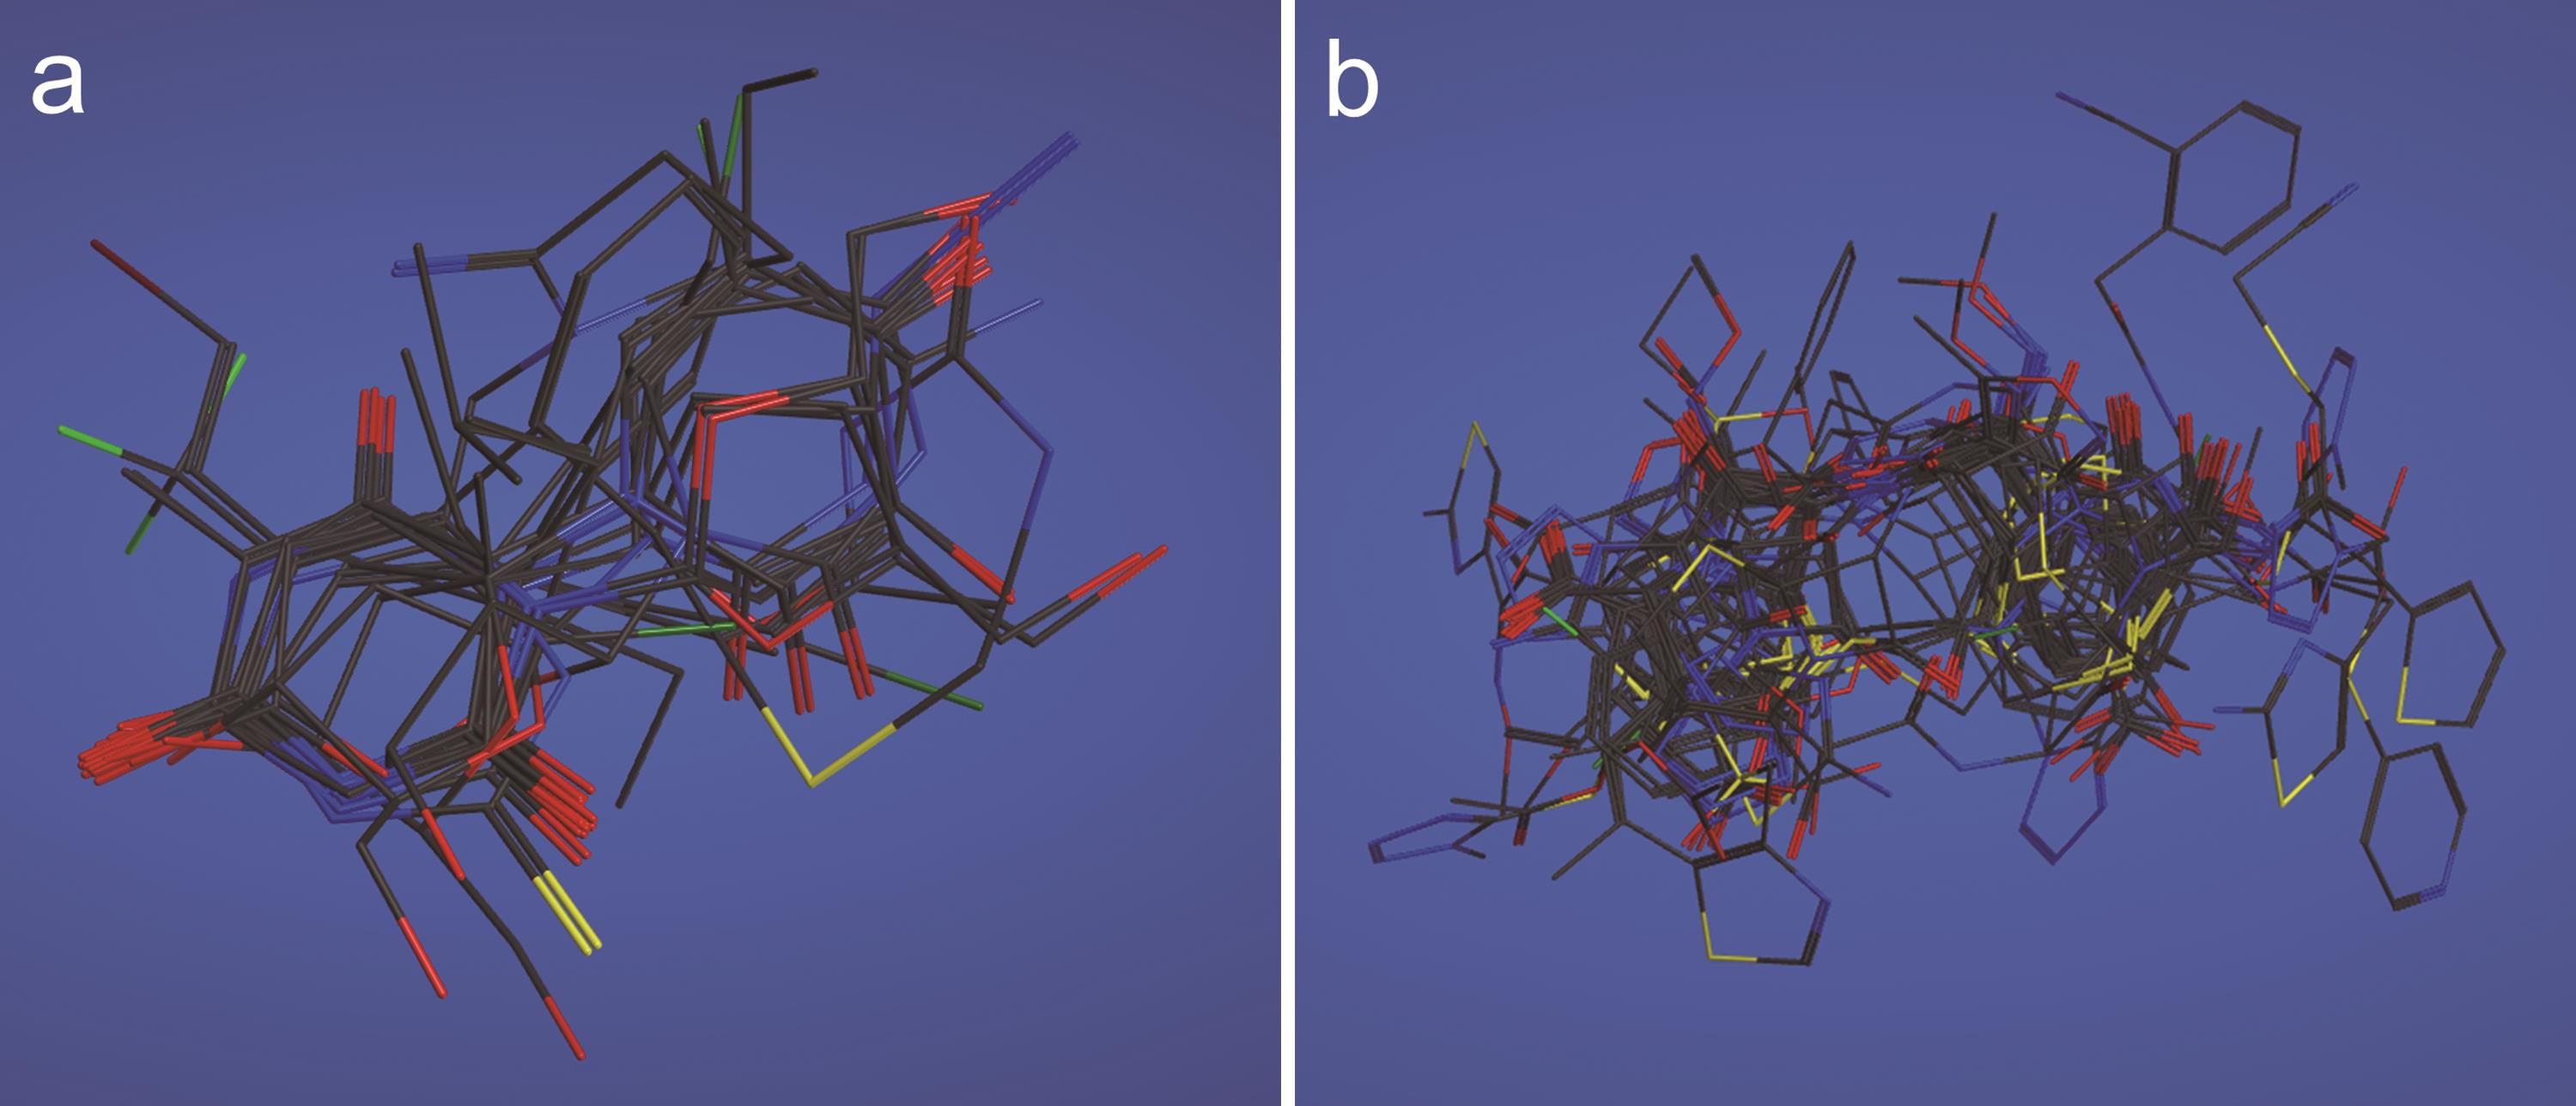 Flexible alignments of compounds in clusters selected by the pharmacophore-based search of possible drug candidates in the conformational database of FDA-approved drugs.